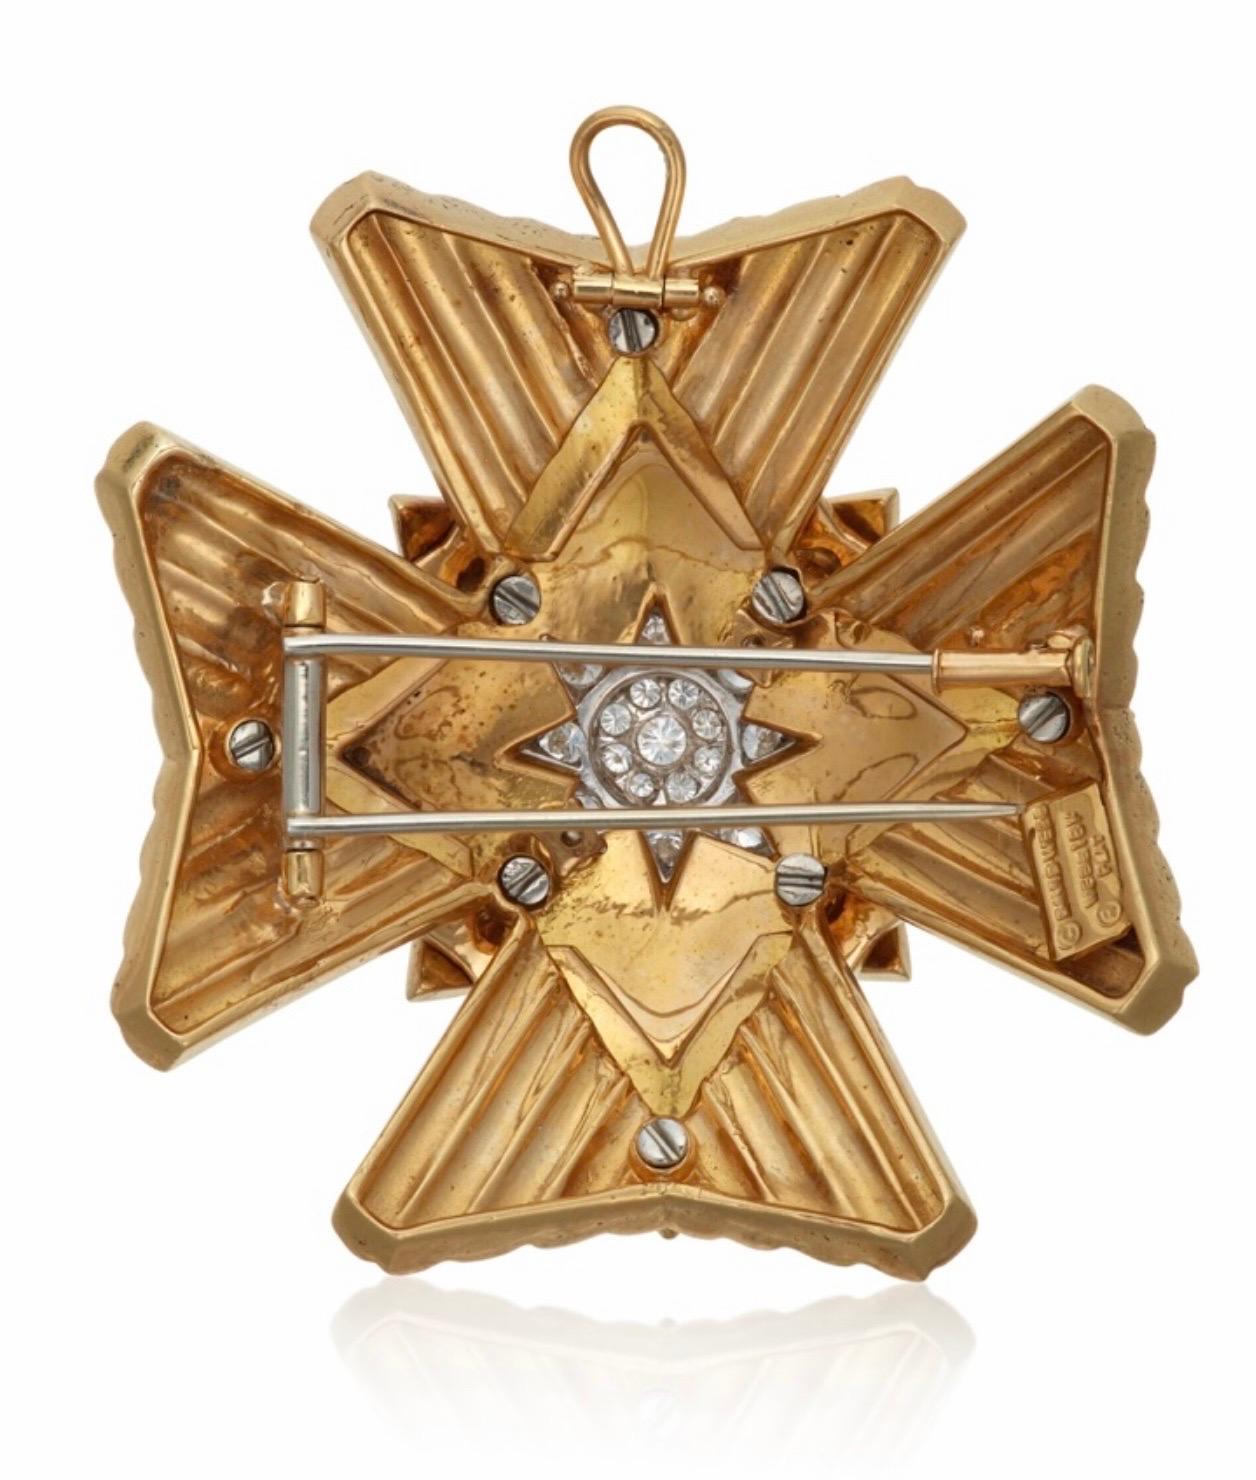 What an incredible addition to any jewelry collection. This classic David Webb enamel Maltese Cross Brooch that can also we worn as a pendant because if of the collapsible pendant hoop. This pieces has been created from 18kt yellow gold, platinum